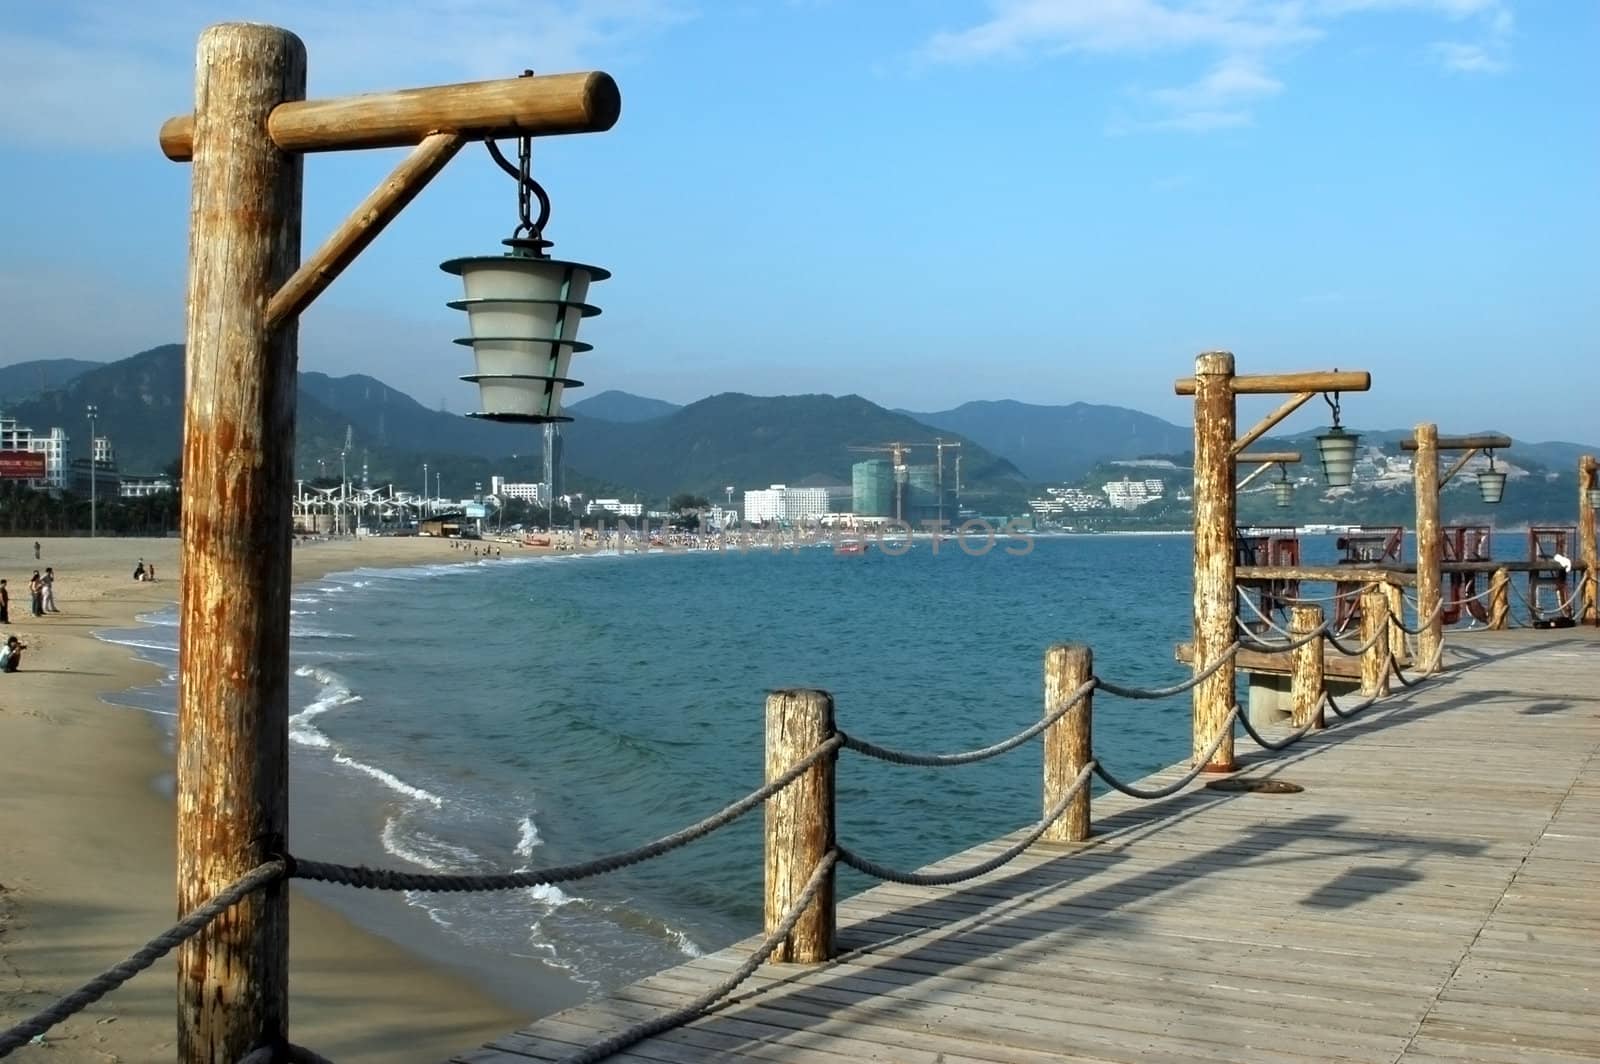 South China Sea, wooden pier at beach near Shenzhen city in Guangdong province.